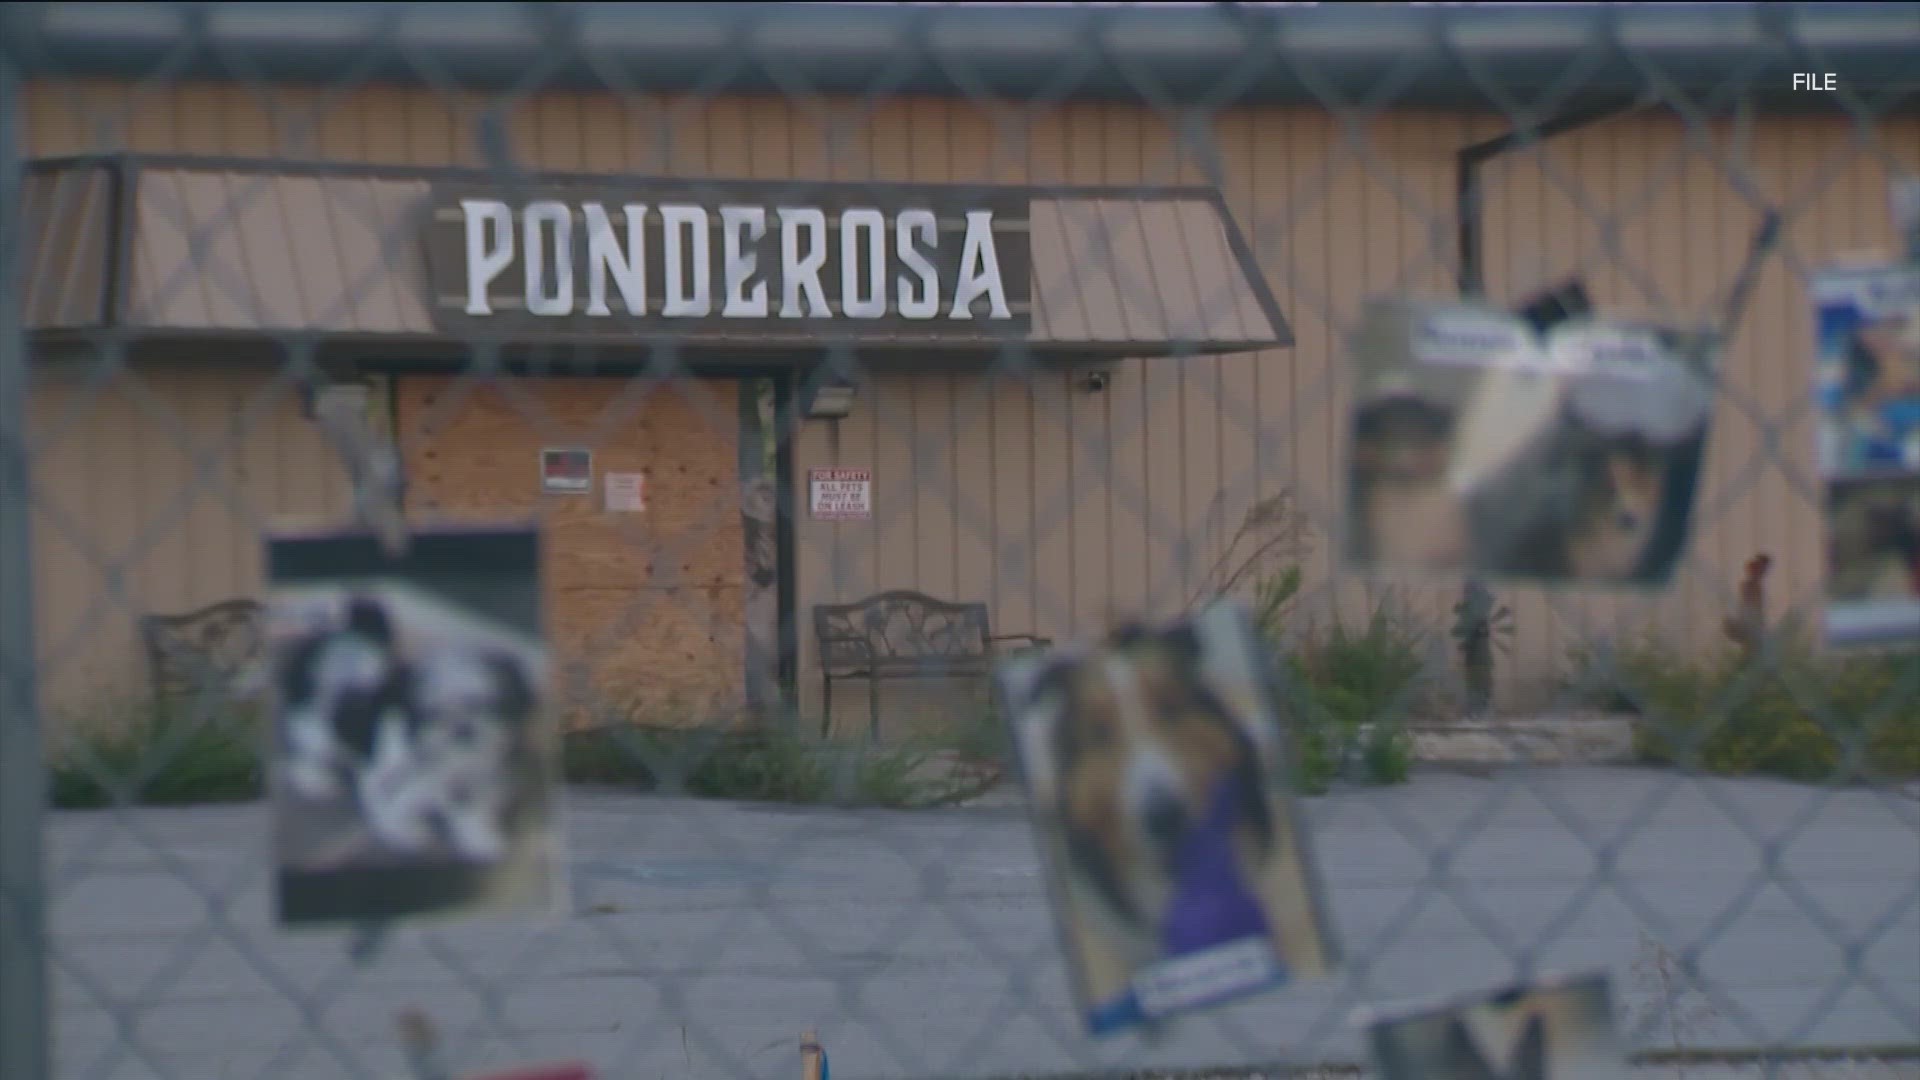 After the Ponderosa Pet Resort fire killed 75 dogs in 2021, the City of Round Rock passed an ordinance to make sure buildings are kept up to code for pet safety.